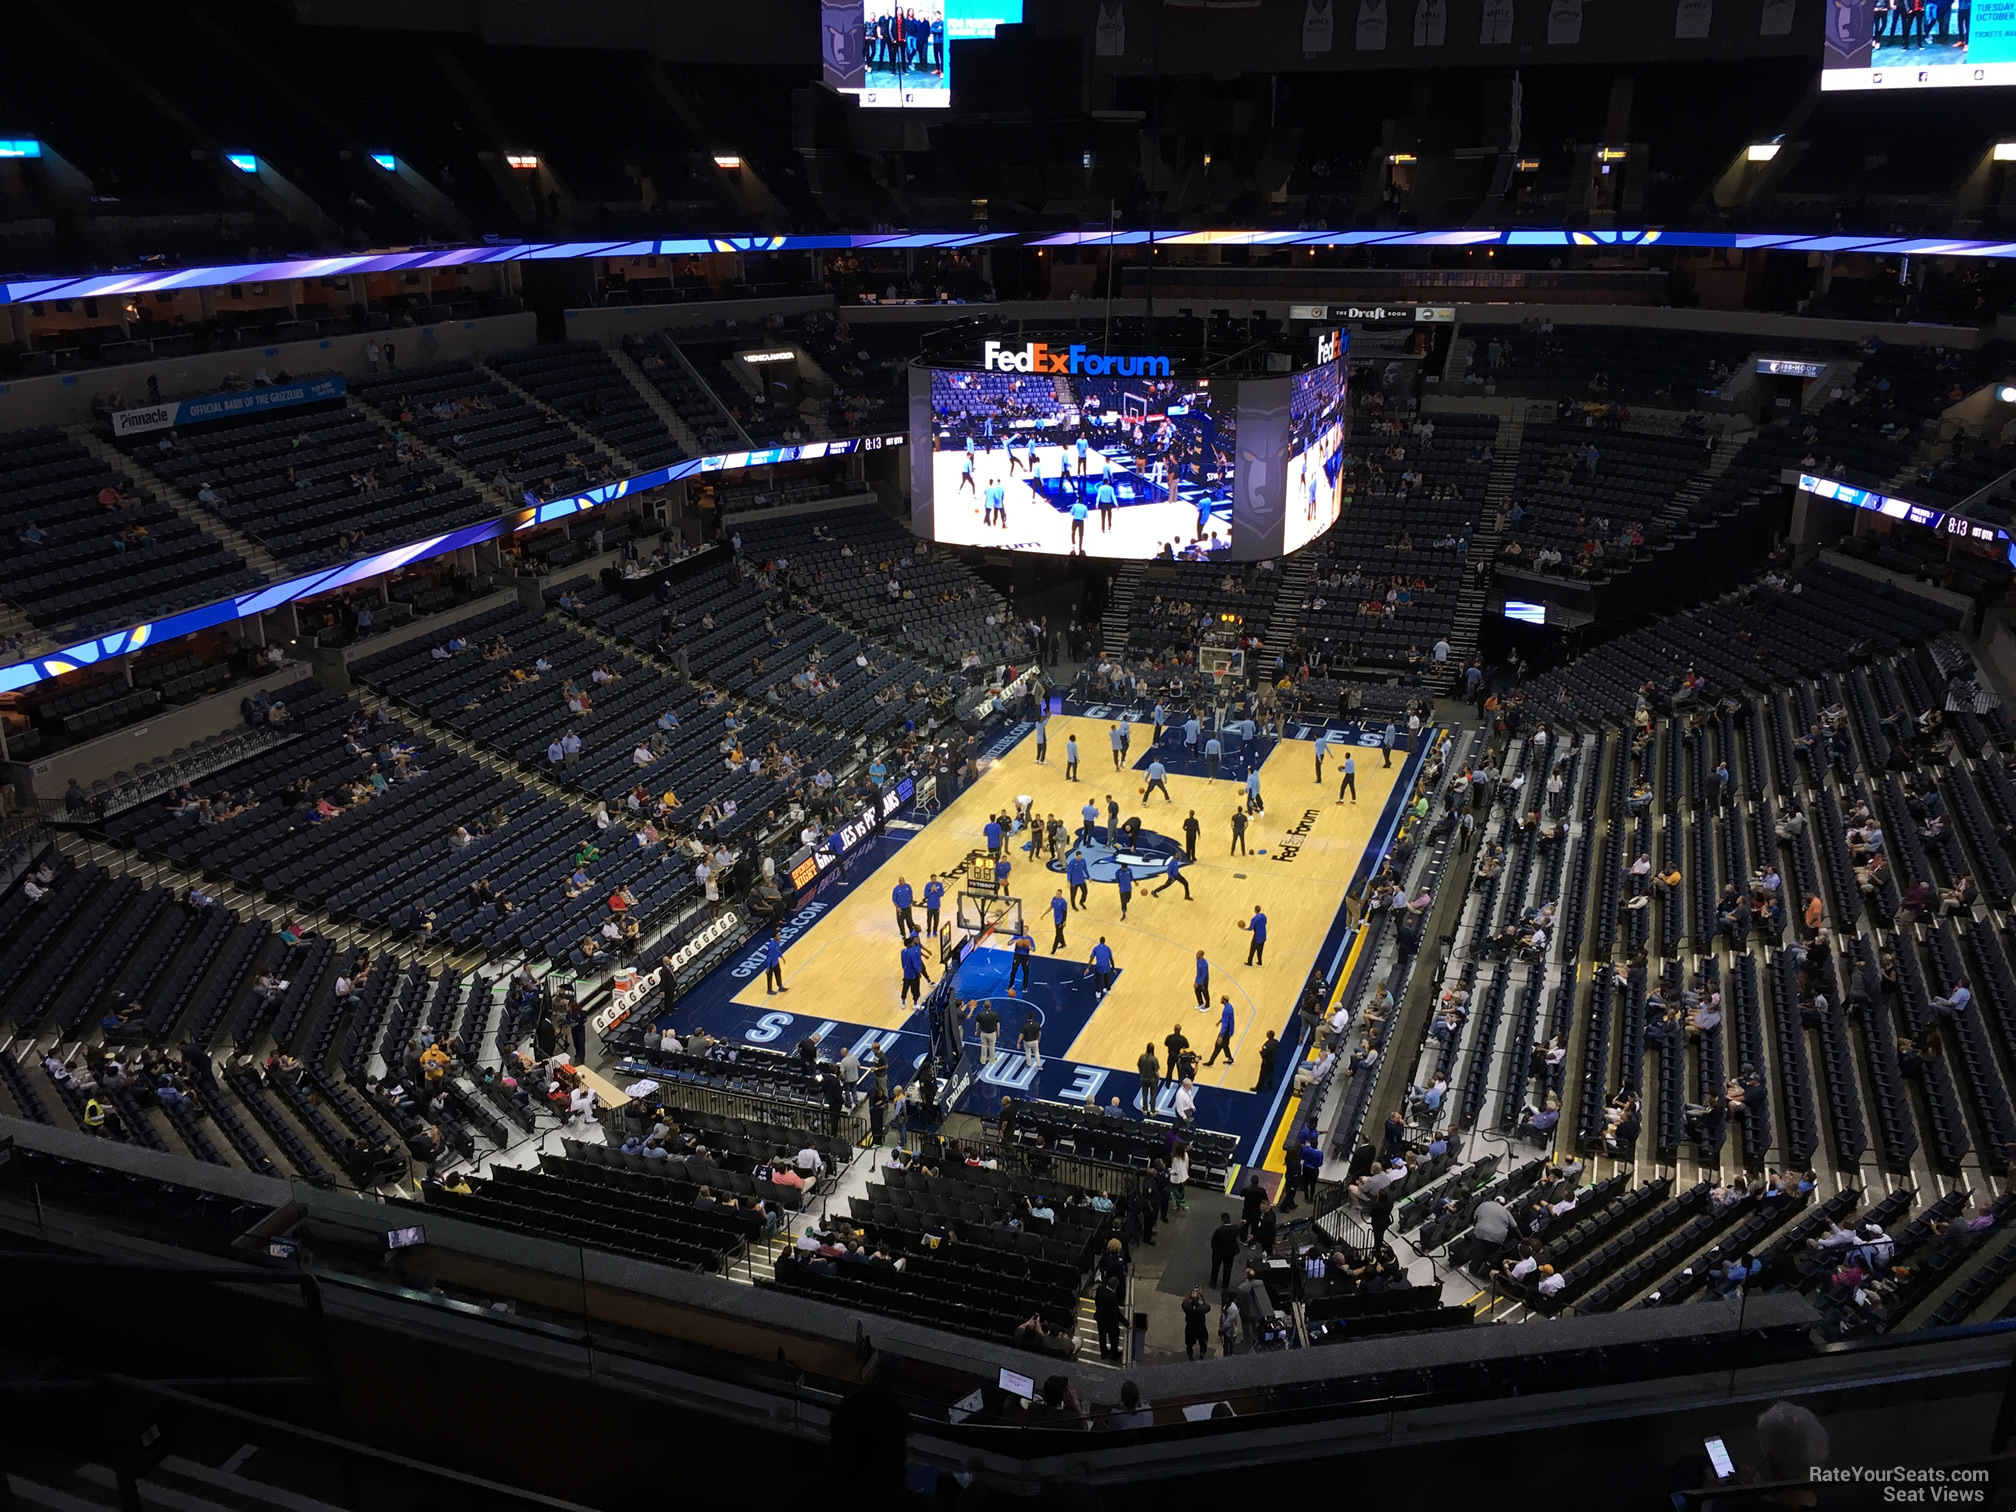 section 218, row f seat view  for basketball - fedex forum